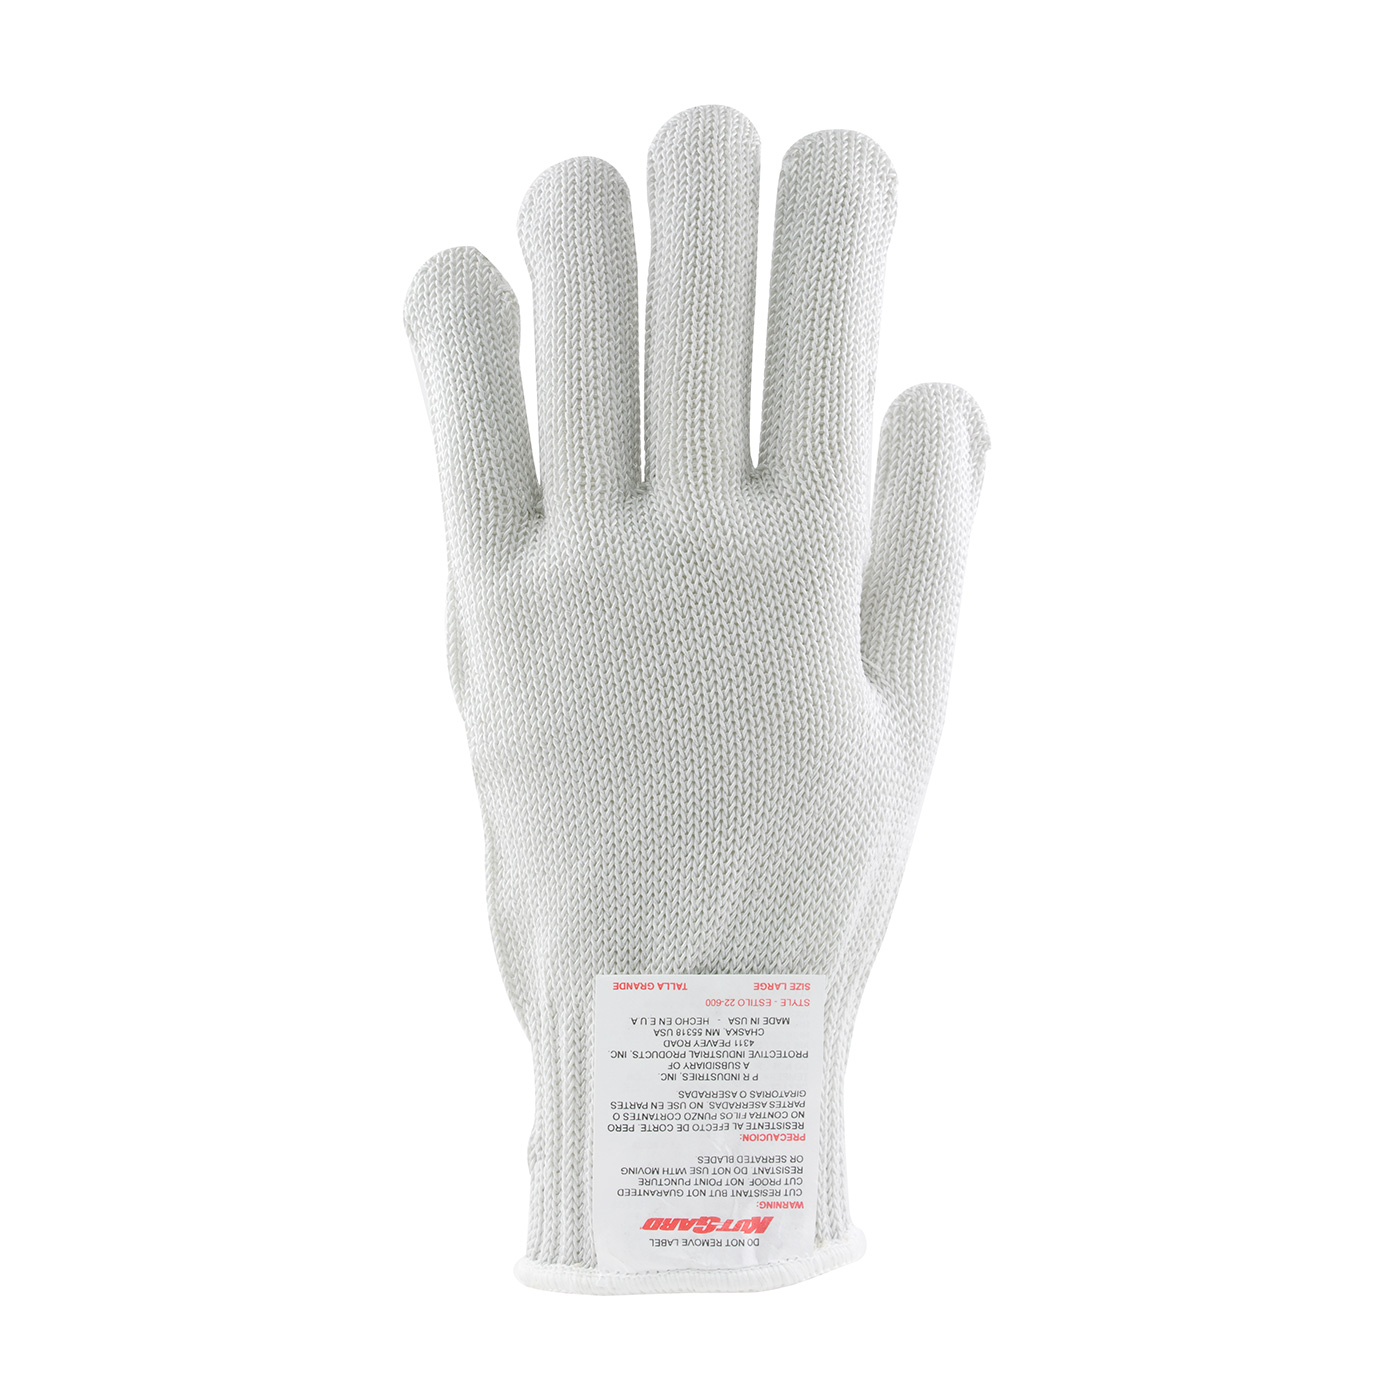 22-600 PIP Claw Cover® Seamless Knit PolyKor® Blended Antimicrobial Glove - Heavy Weight